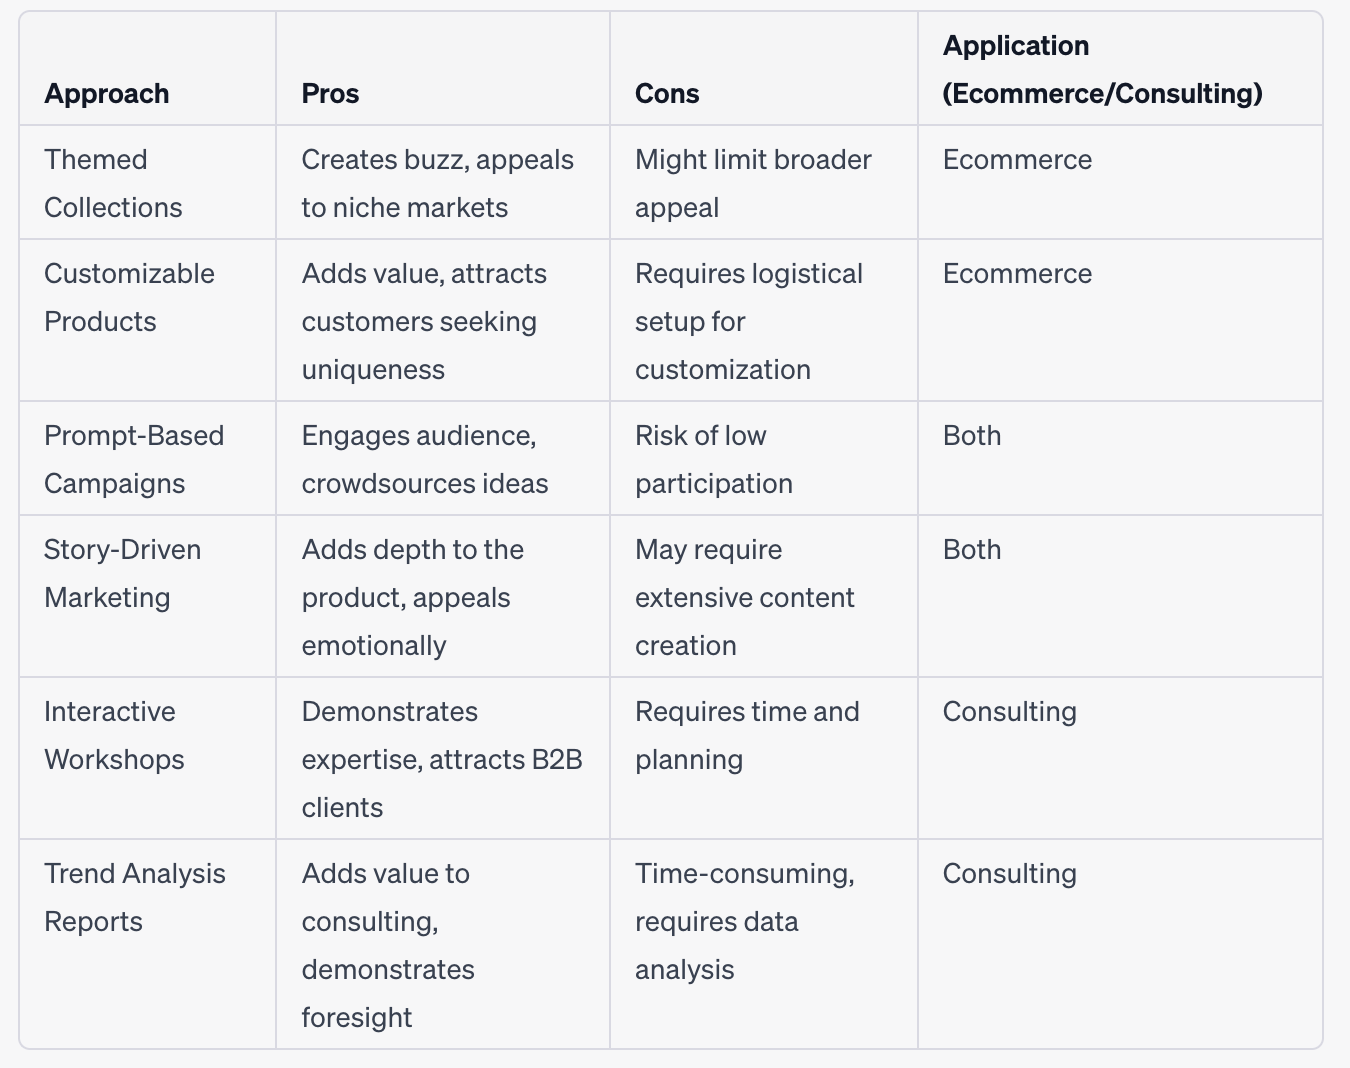 Table of Methods, Pros, Cons and Applications